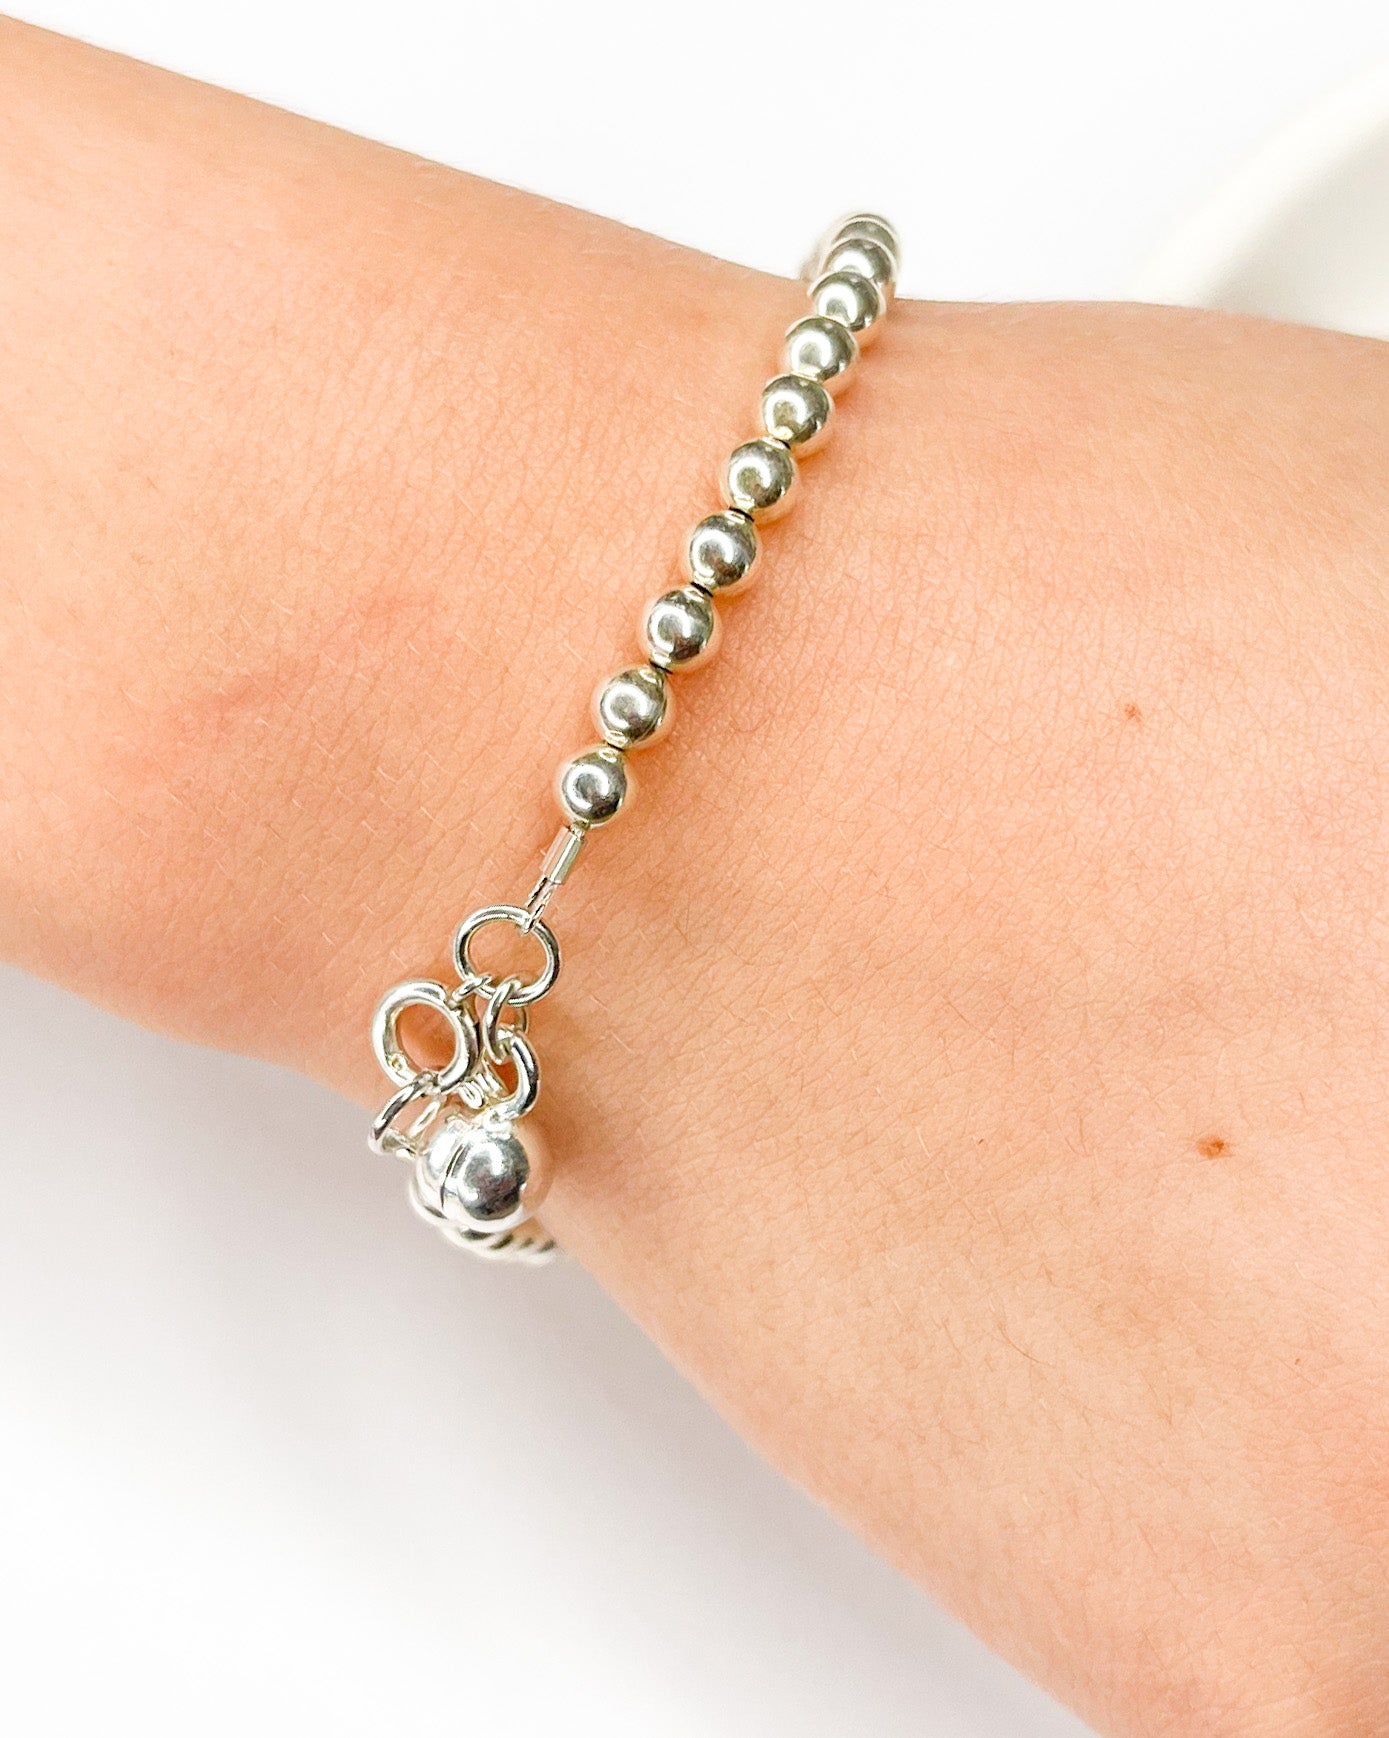 Kids Thick Bubble Bracelet W Balls-Solid Sterling Silver